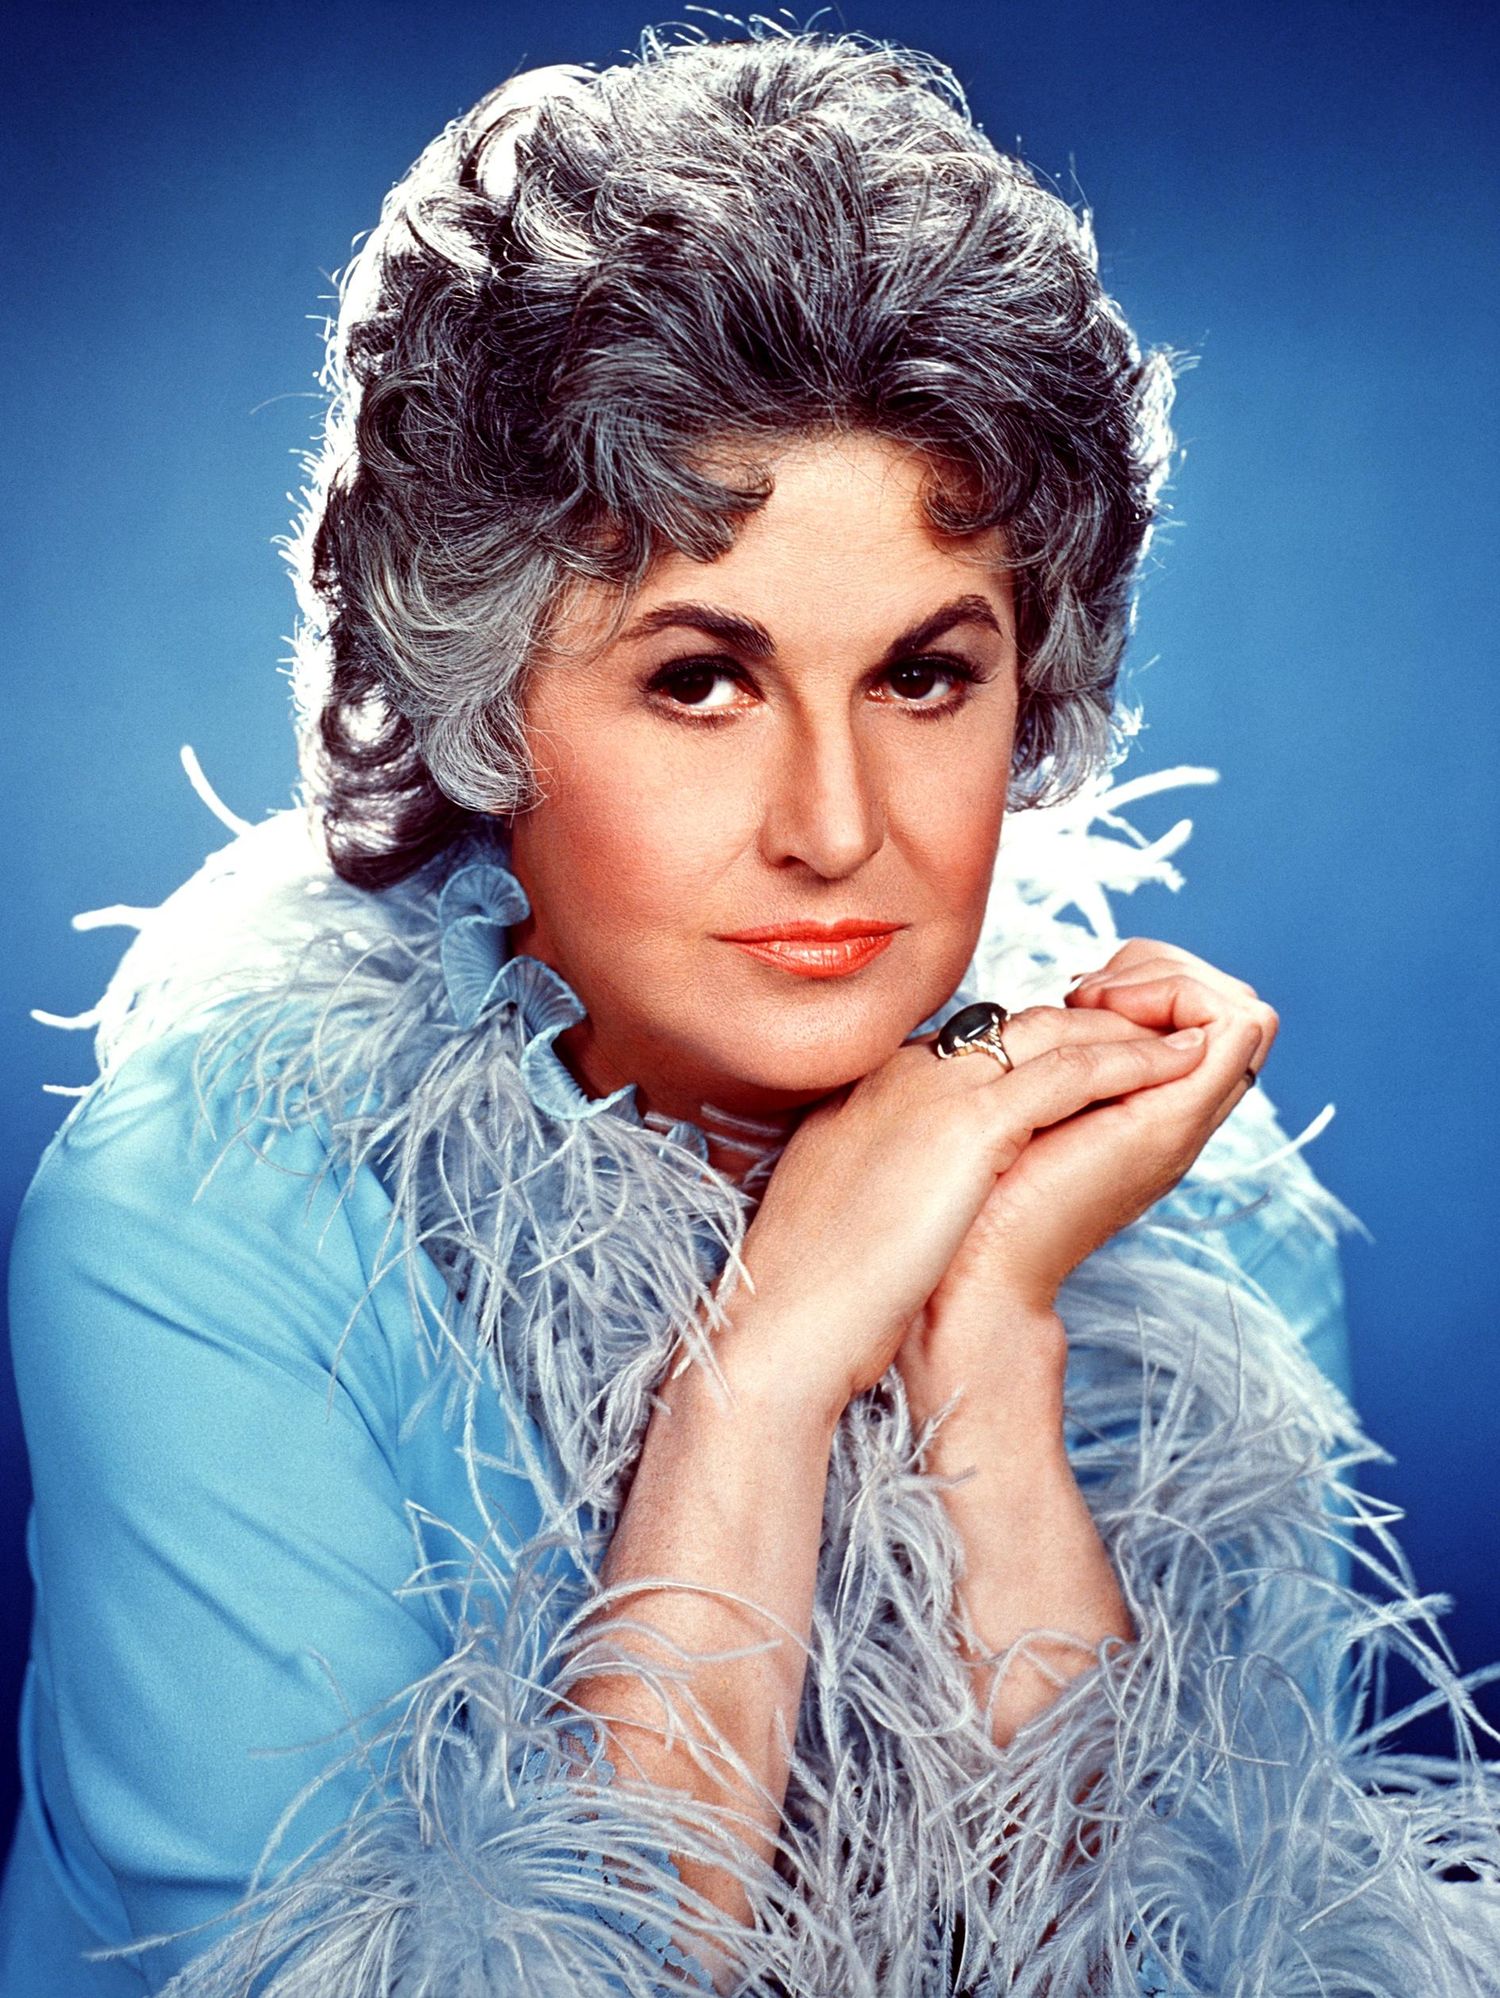 Actress Bea Arthur poses in a light blue dressing gown with a feathered collar and cuffs against a darker blue backdrop.